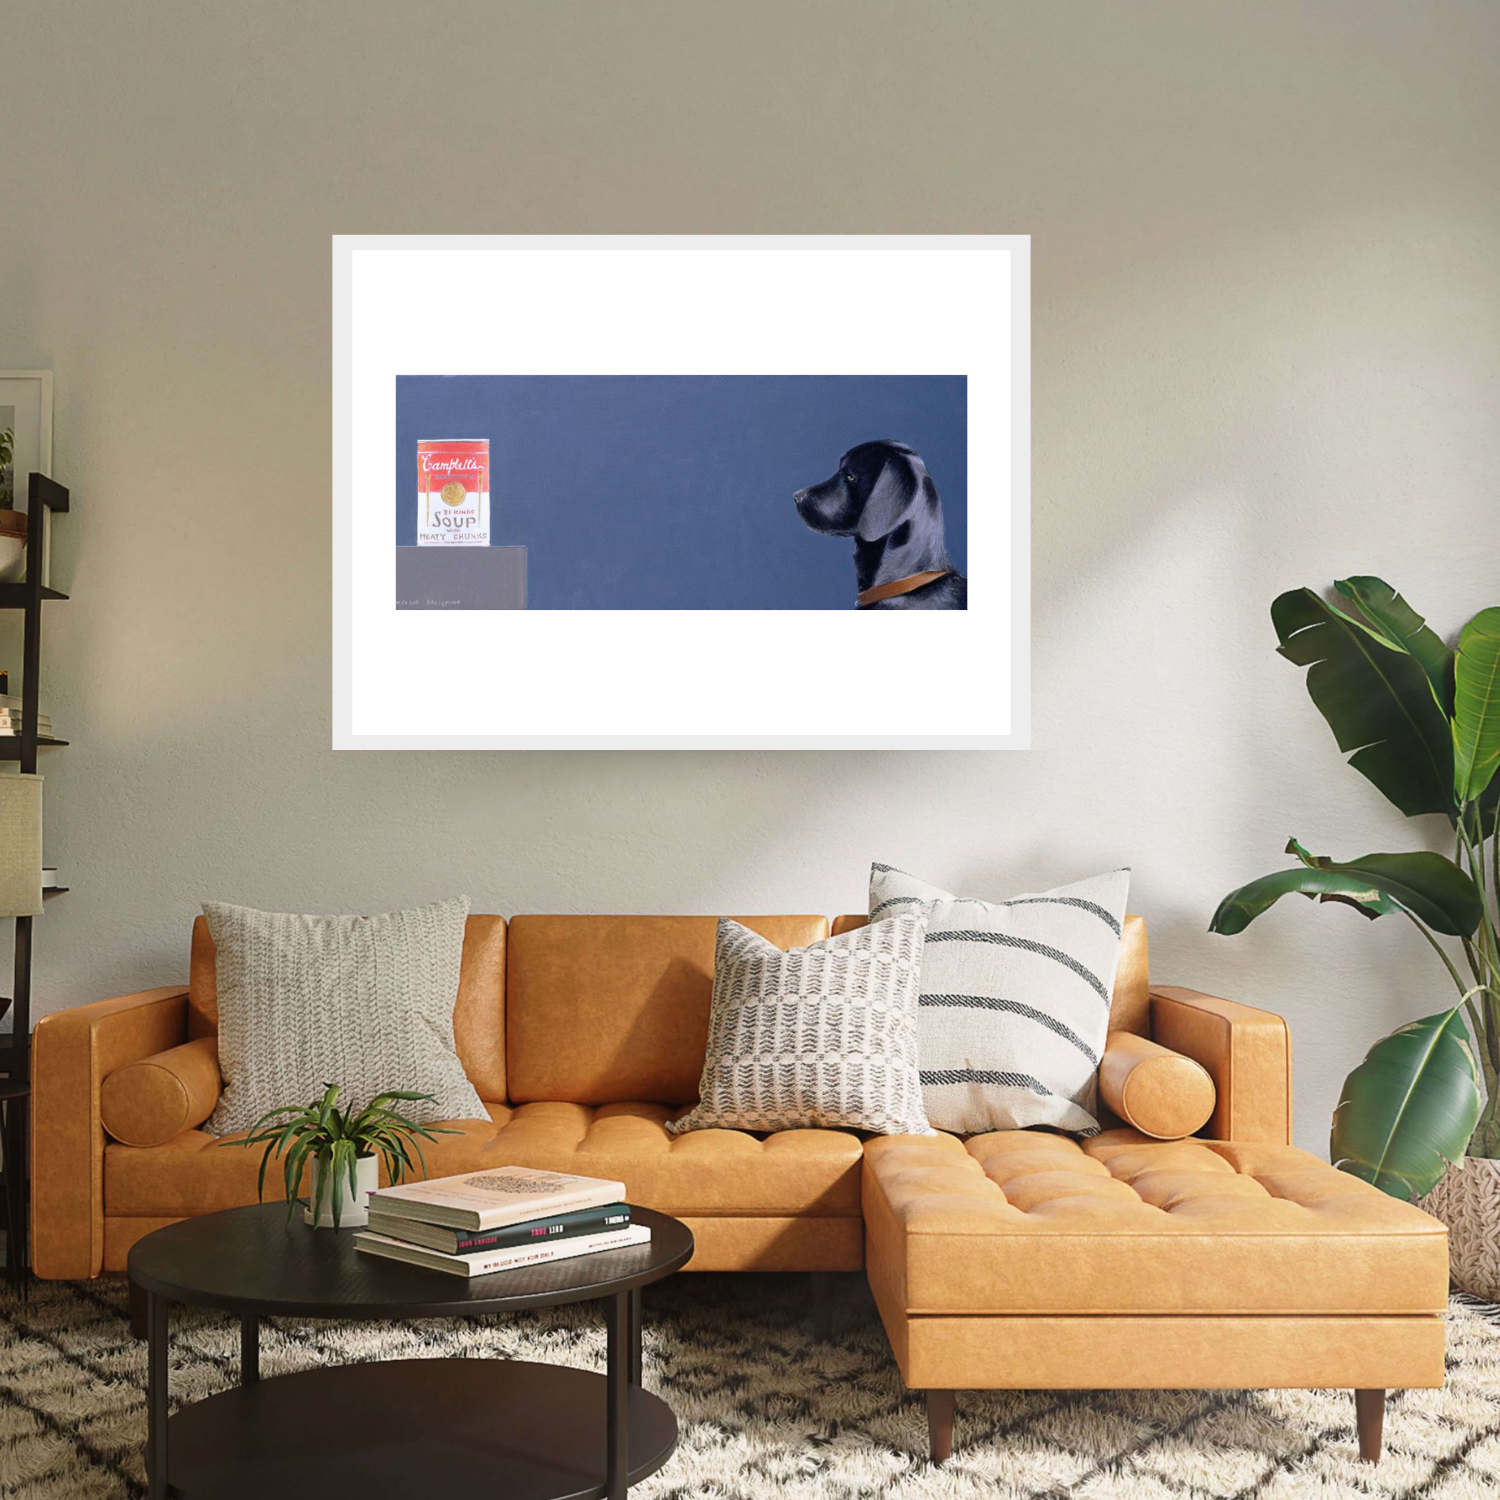 Experience the surreal "Black Dog with Campbell's Soup, 2020" by Lincoln Seligman. This print showcases a black dog facing a counter with Campbell's soup against a deep blue backdrop. Now available as a white framed archival digital print.